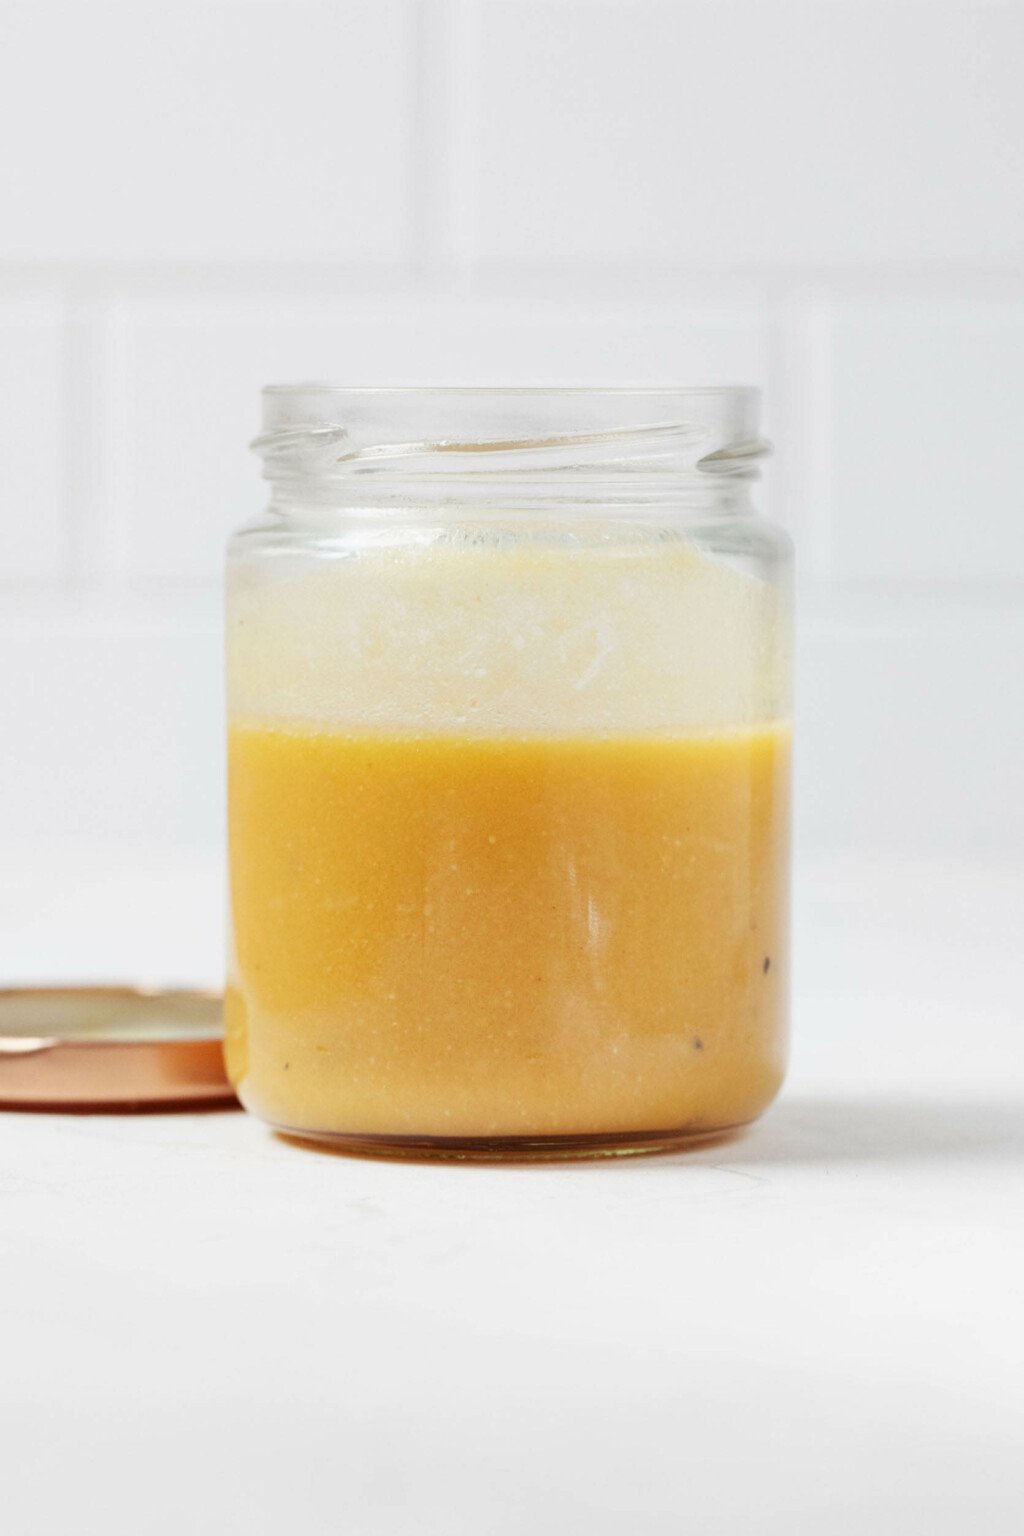 An angled image of a clear, small mason jar, which is filled with a creamy miso vinaigrette. The vinaigrette contains orange juice and has a pale orange color.